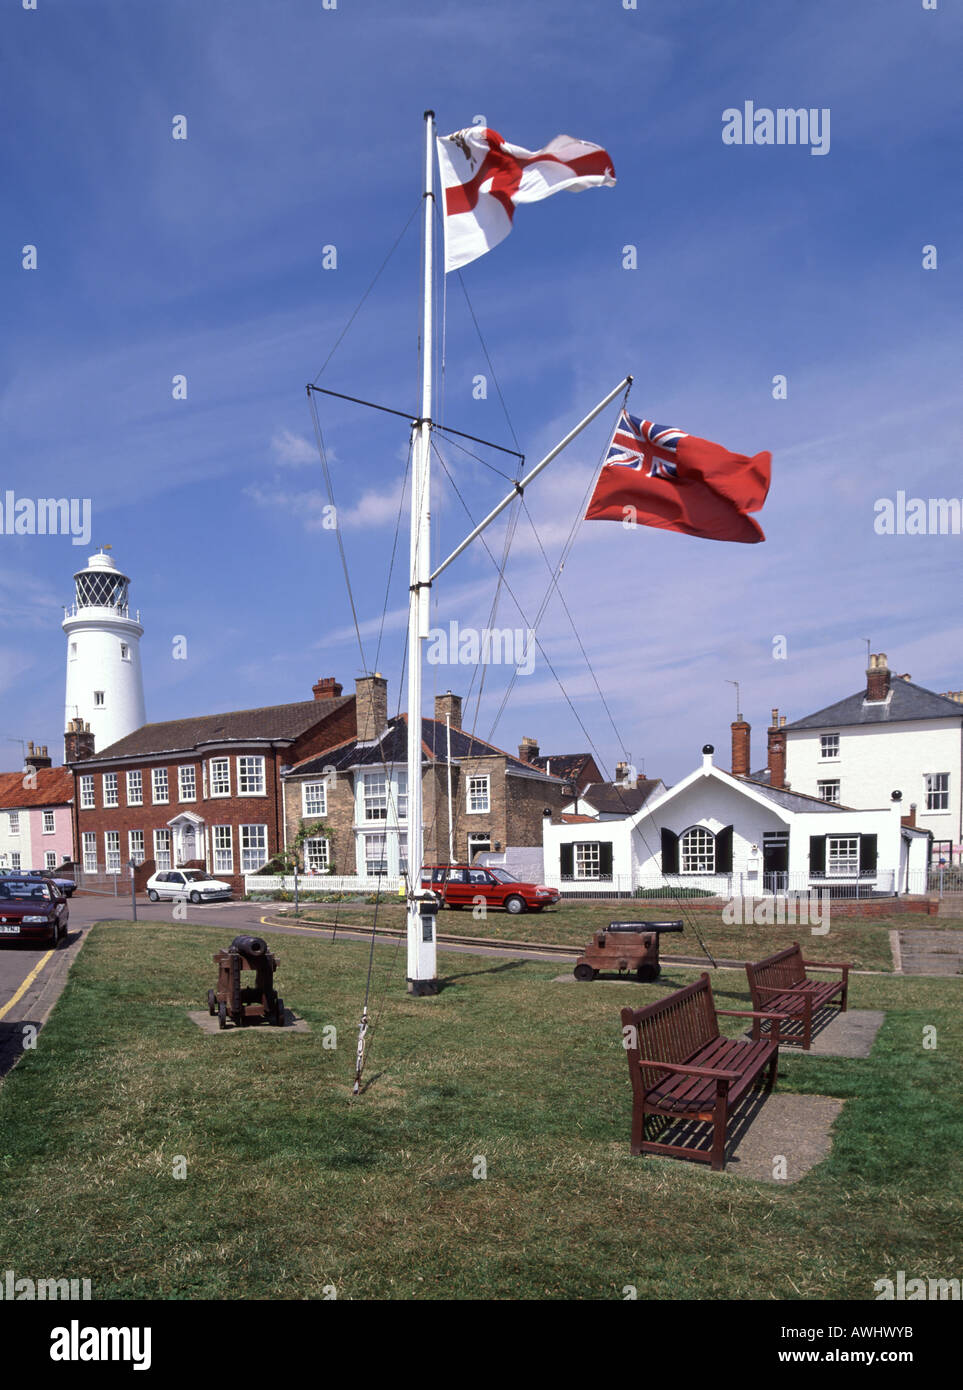 Southwold Seaside Resort Town Flagpole & Flag of St George mit Red Ensign & Working Lighthouse Beyond Suffolk East Anglia England UK Stockfoto